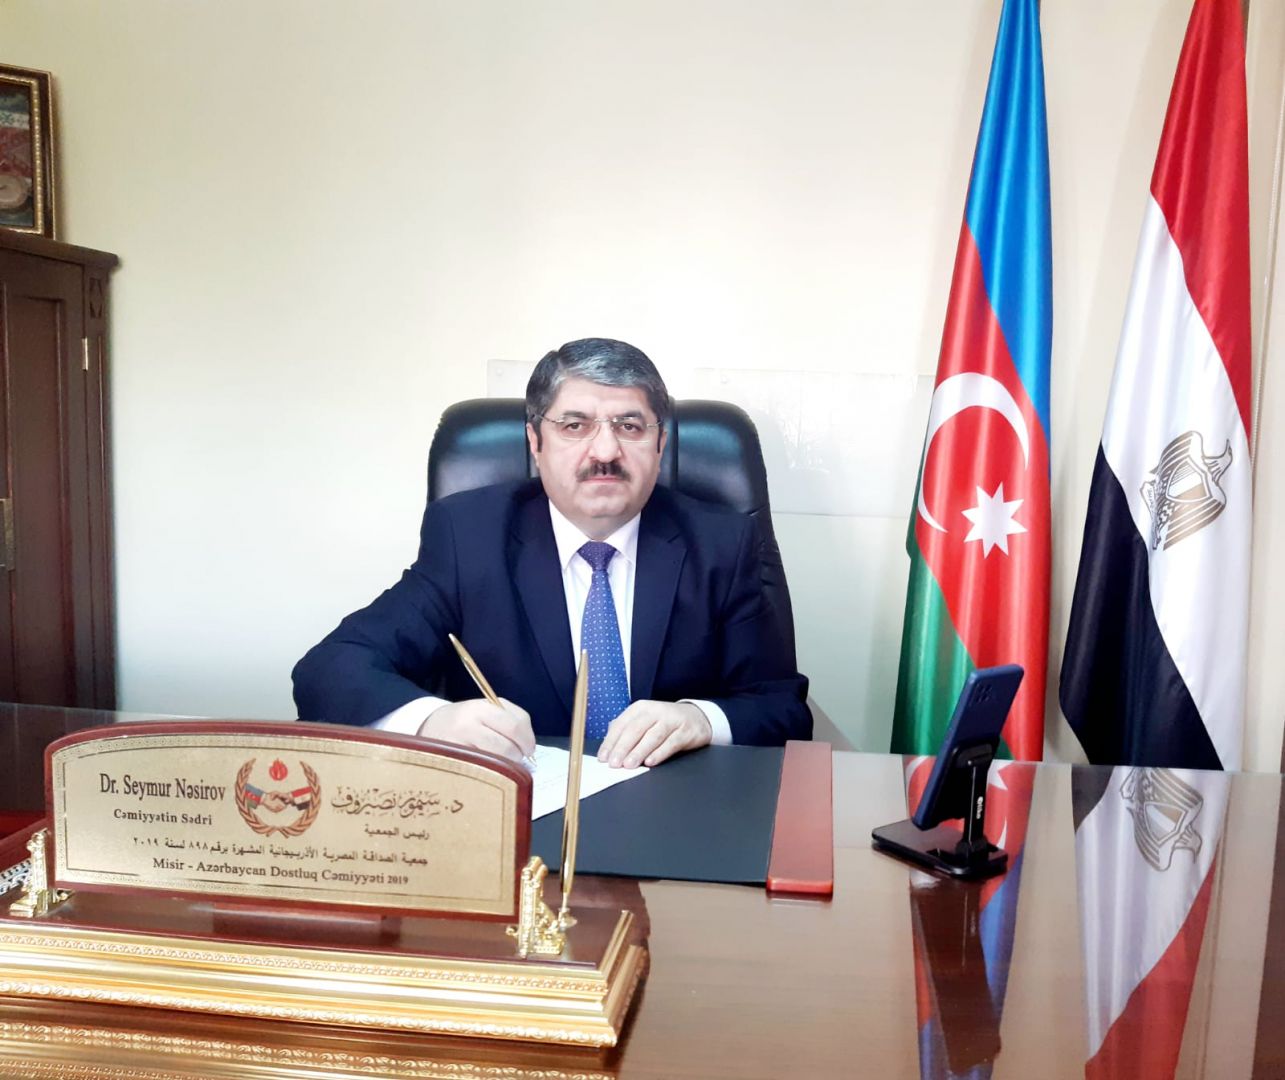 National Leader's political path is taught as science in Egyptian schools - Azerbaijani Diaspora Chair